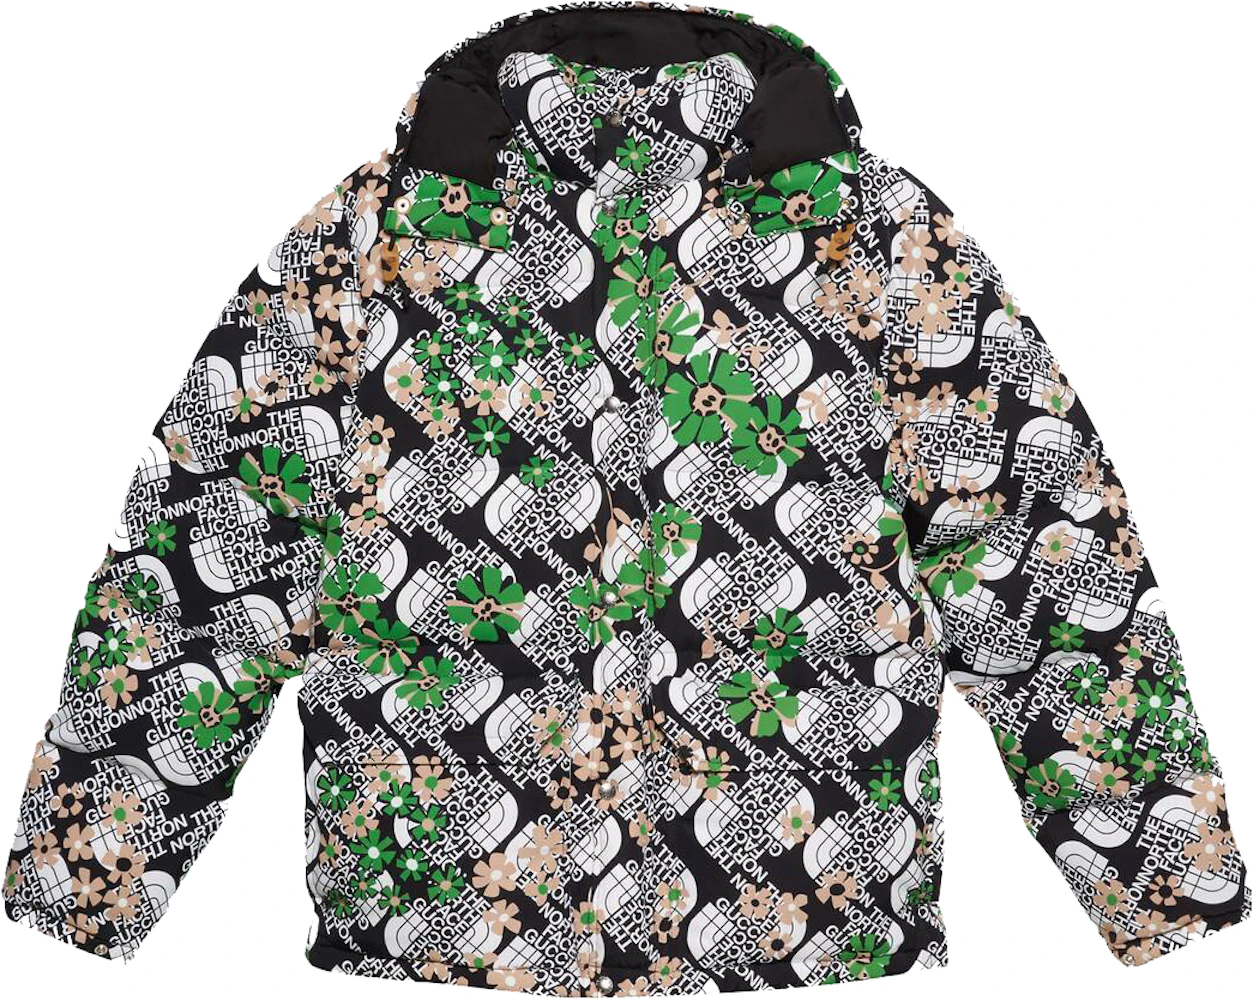 Gucci Green The North Face Edition Down Nylon Froisse Jacket Gucci